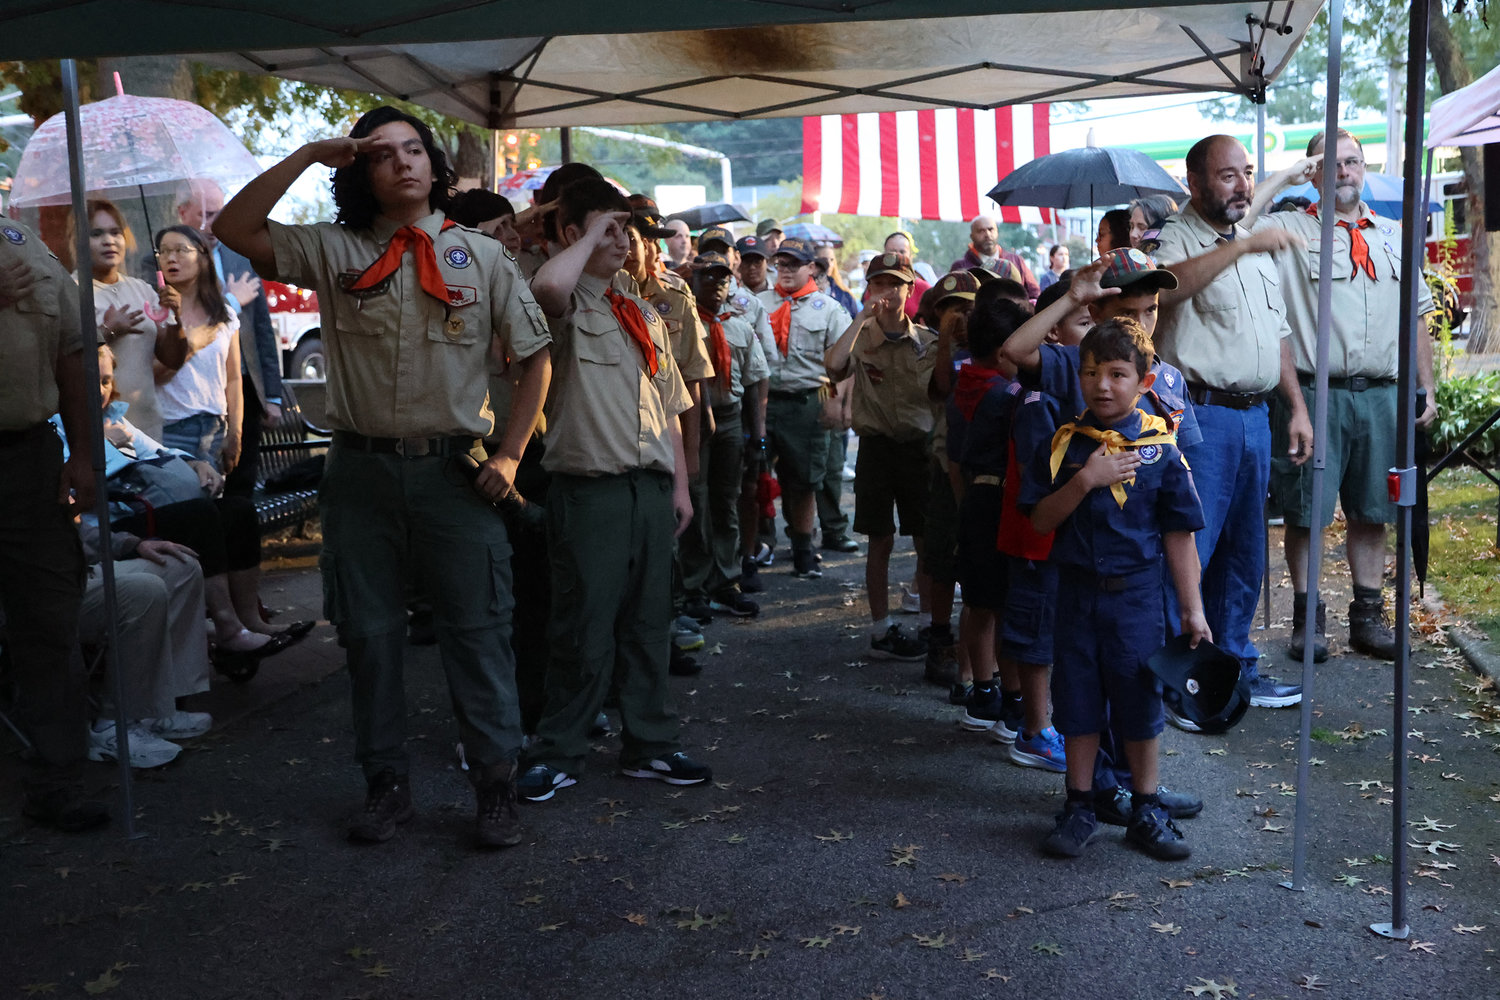 Boy Scout troop 240 stood at attention at the 9/11 memorial ceremony in Hall’s Pond Park.